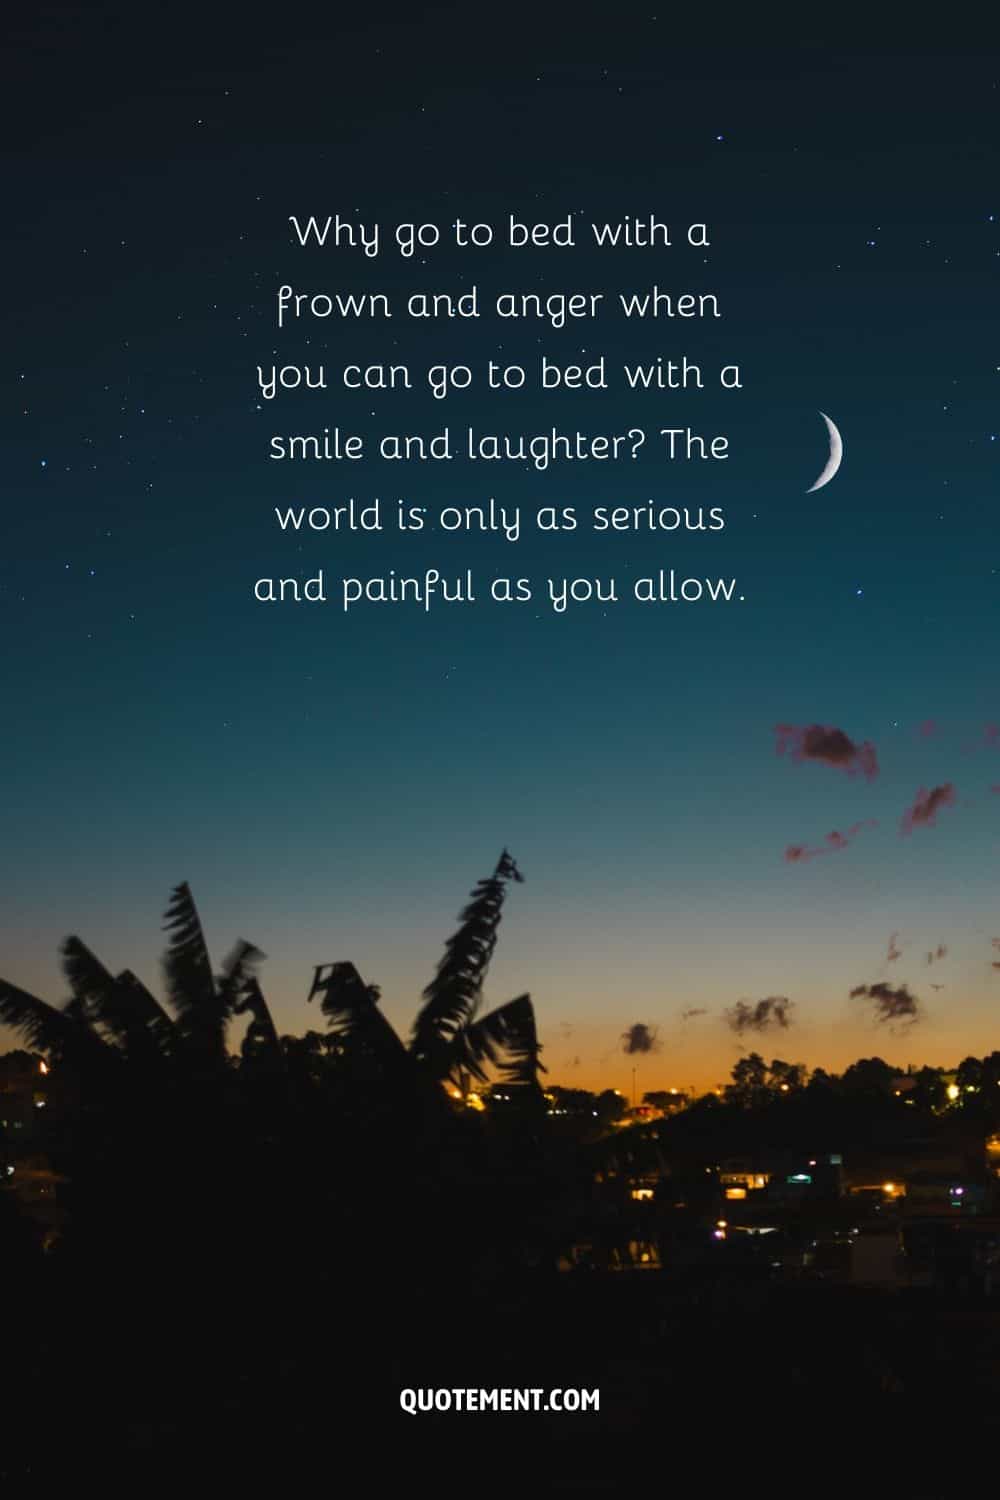 Why go to bed with a frown and anger when you can go to bed with a smile and laughter